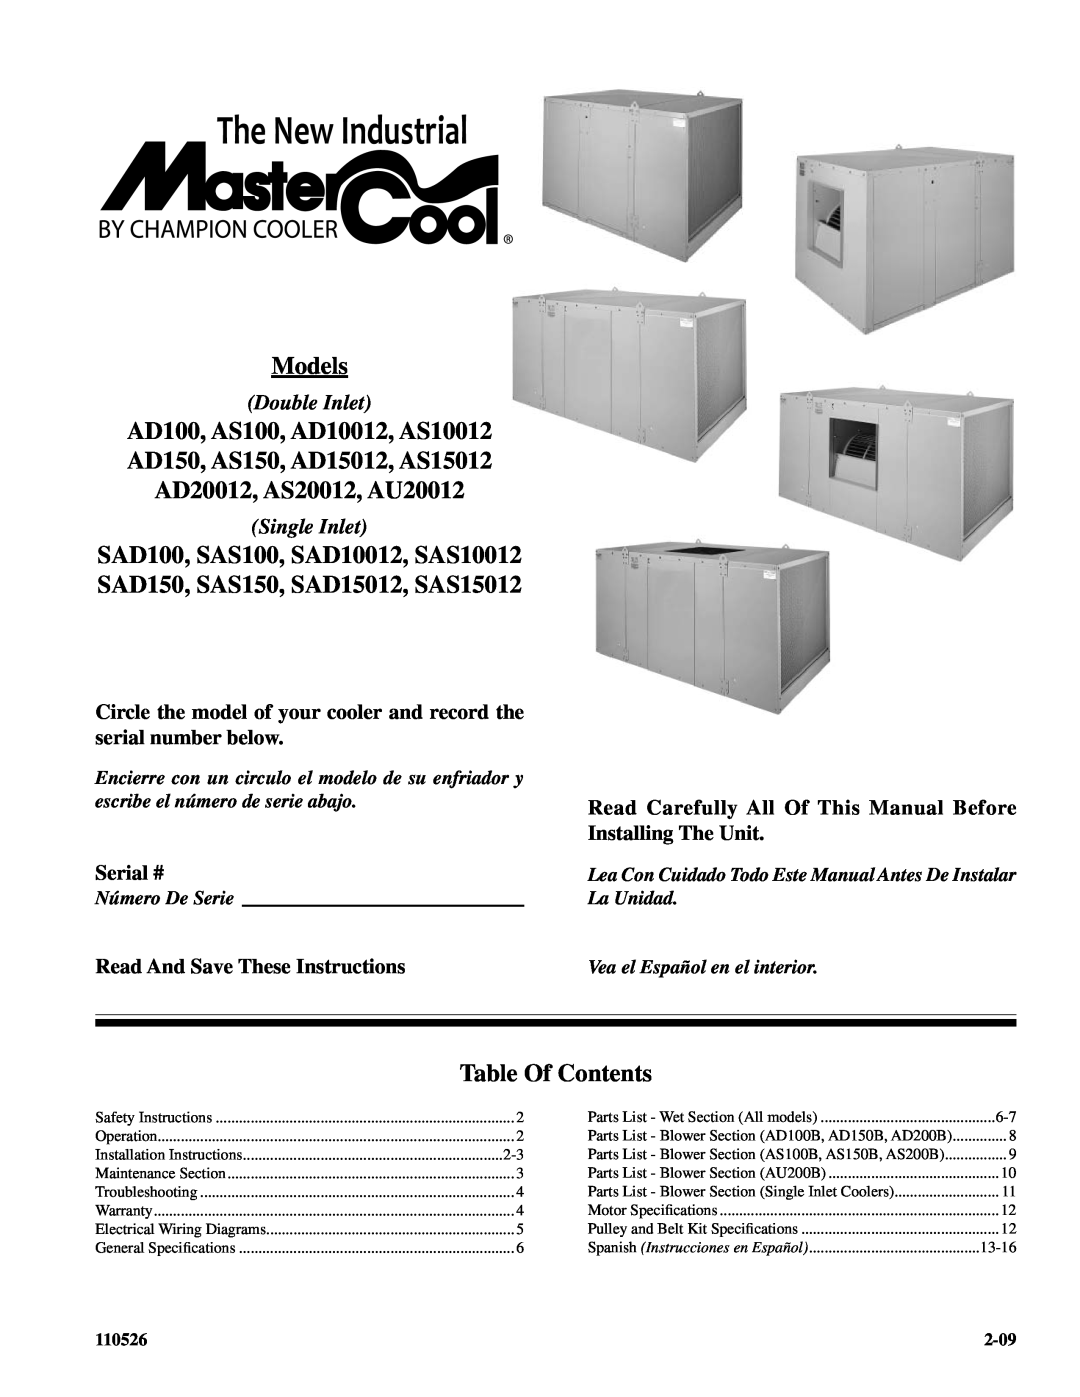 Essick Air AS15012, AS20012, SAD150, AS10012 installation instructions Models, Table Of Contents, The New Industrial 